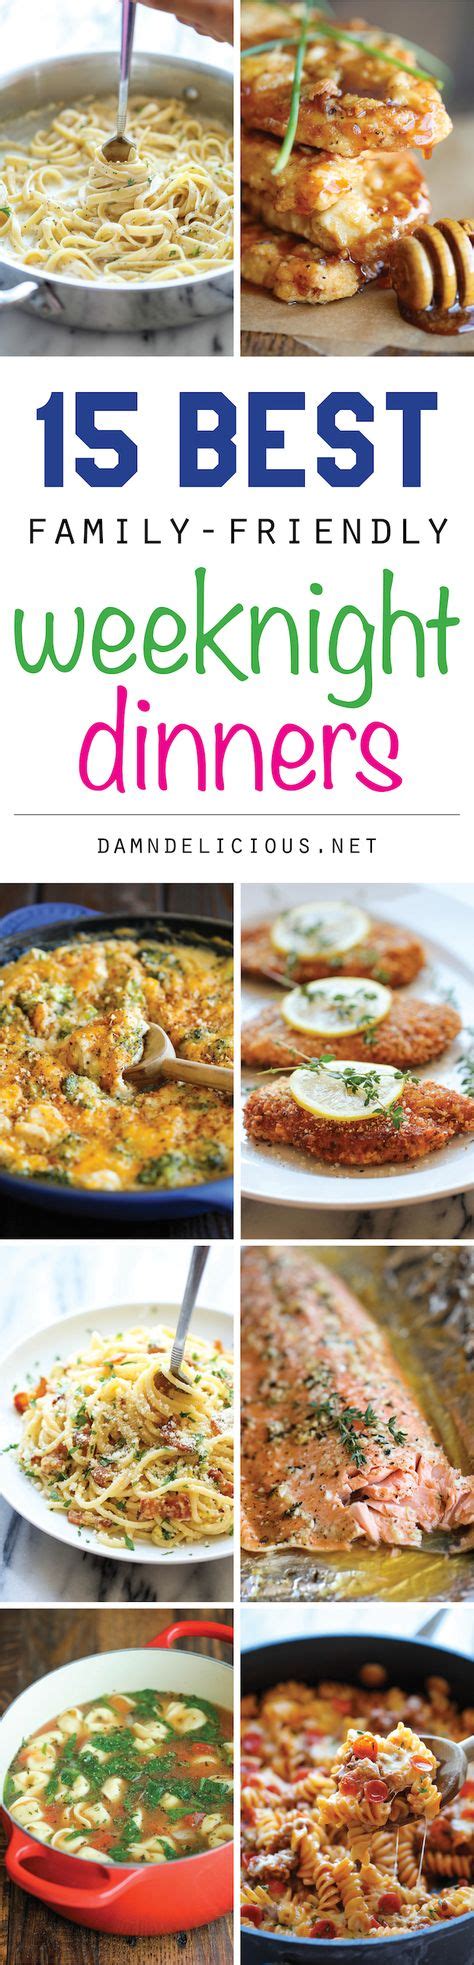 15 Best Family-Friendly Weeknight Dinners | Cooking ...